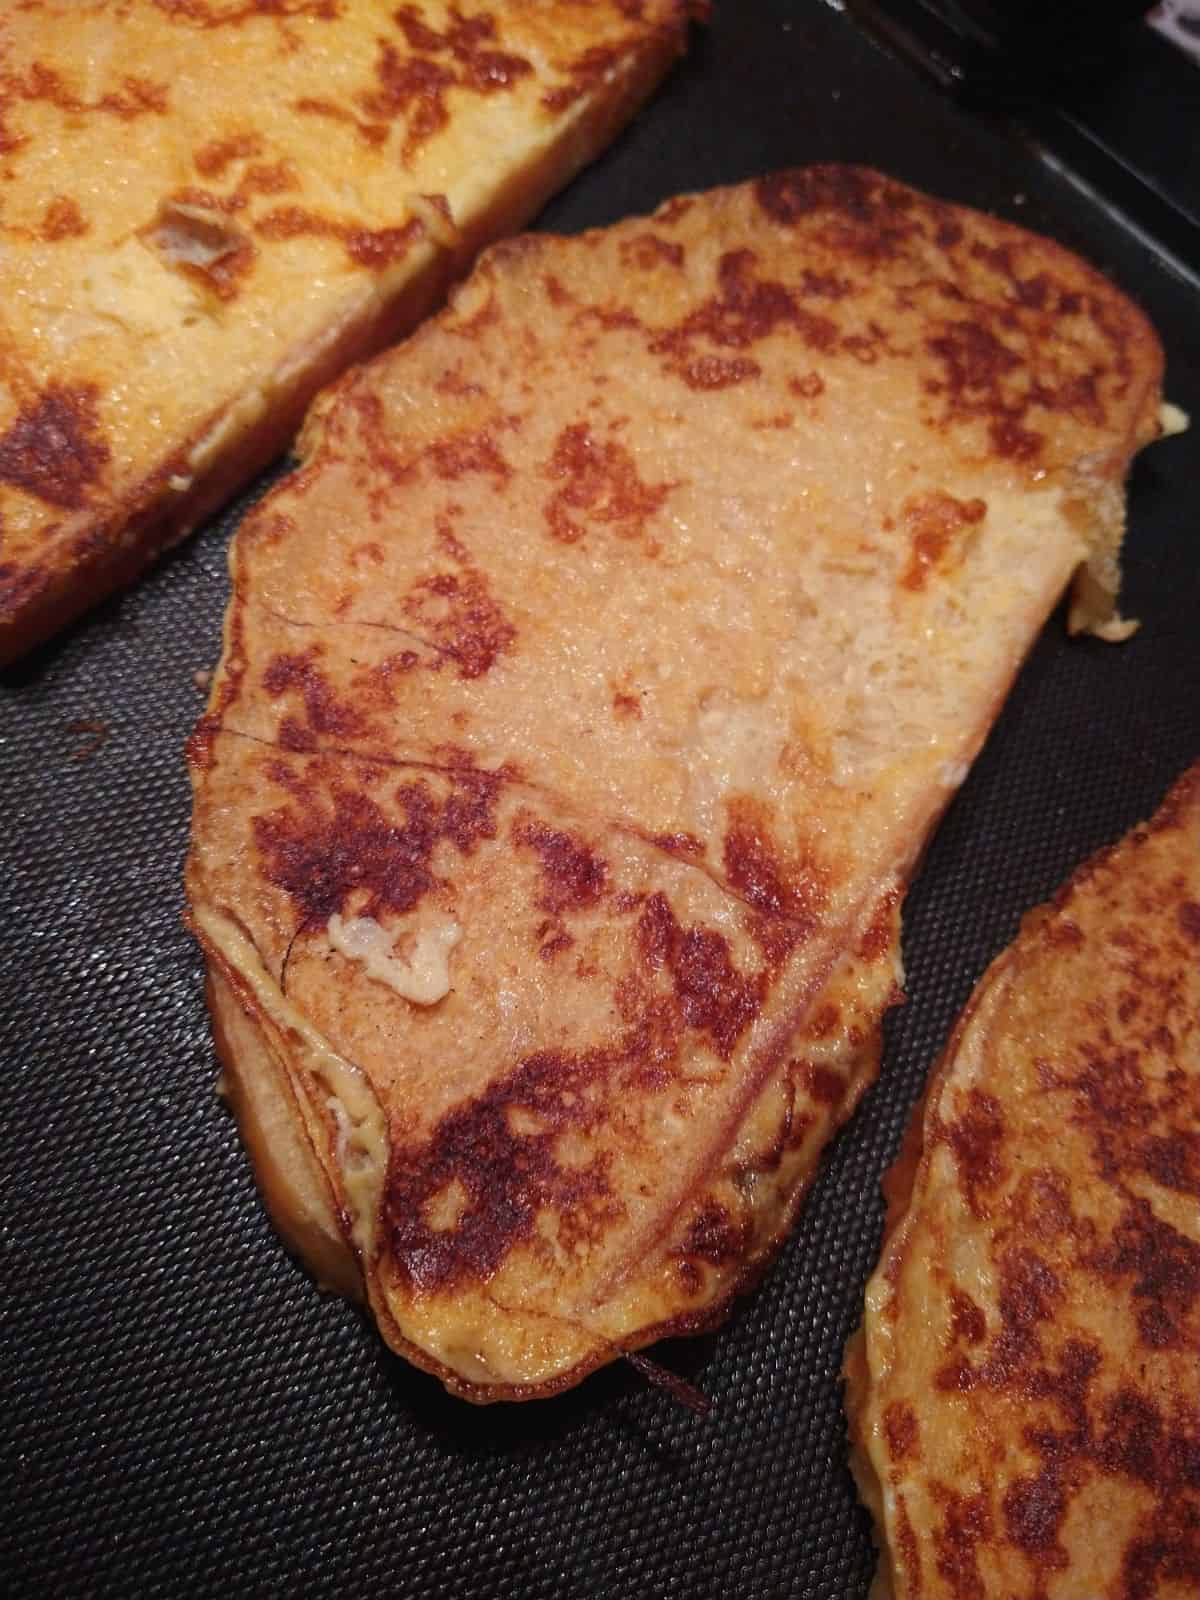 Finished slices of sourdough egg nog French toast on an electric griddle.